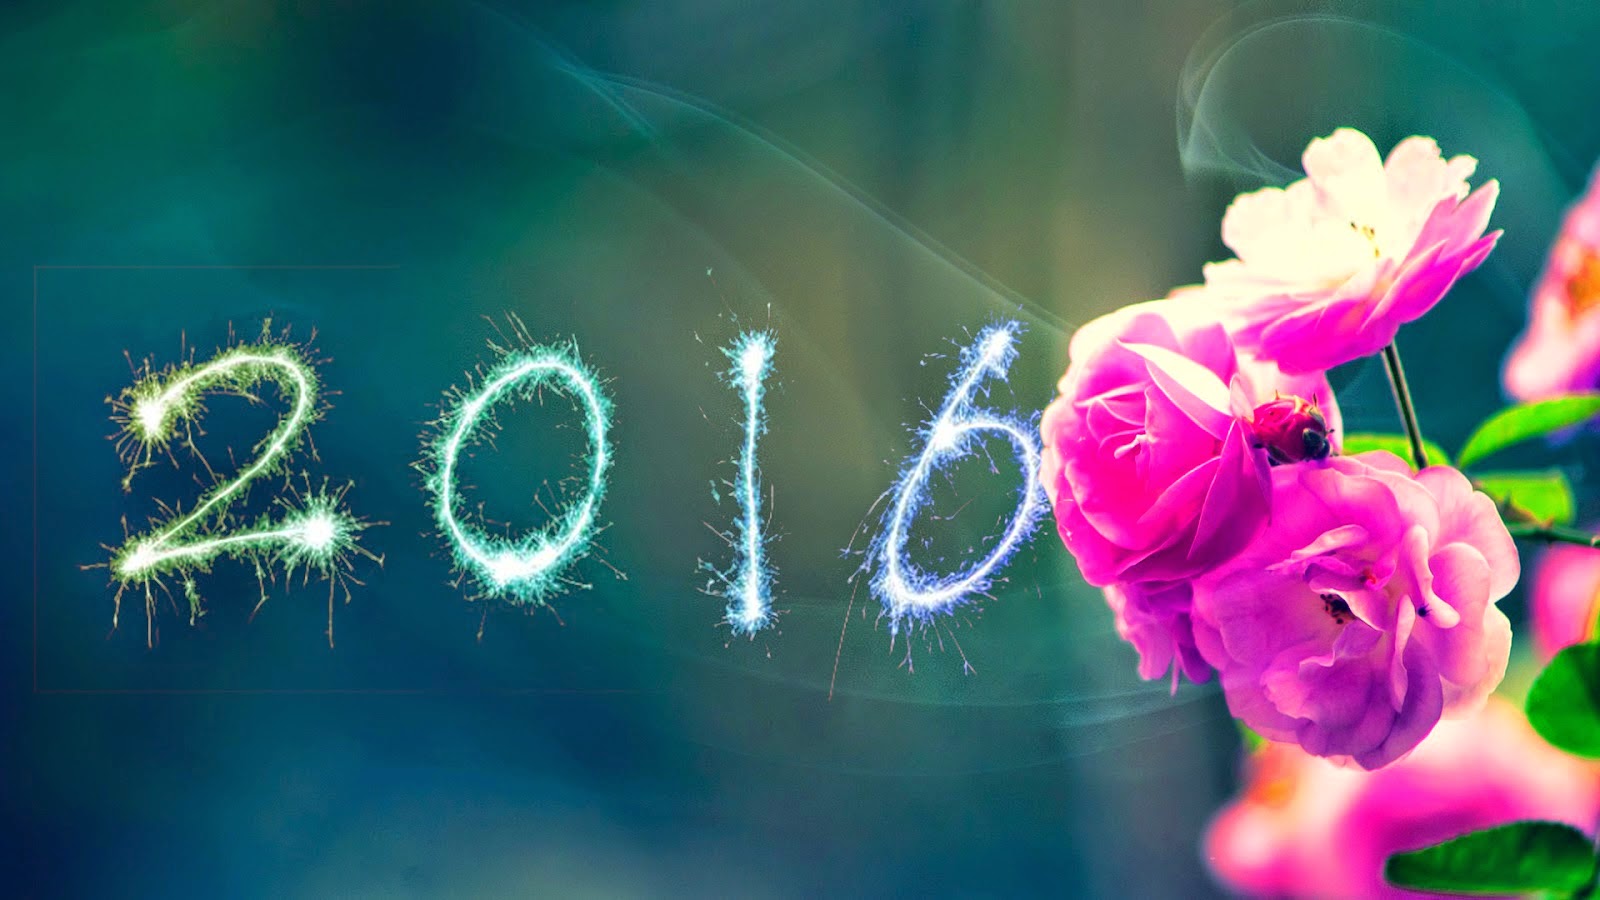 Happy New Year Wallpaper And Image Wele